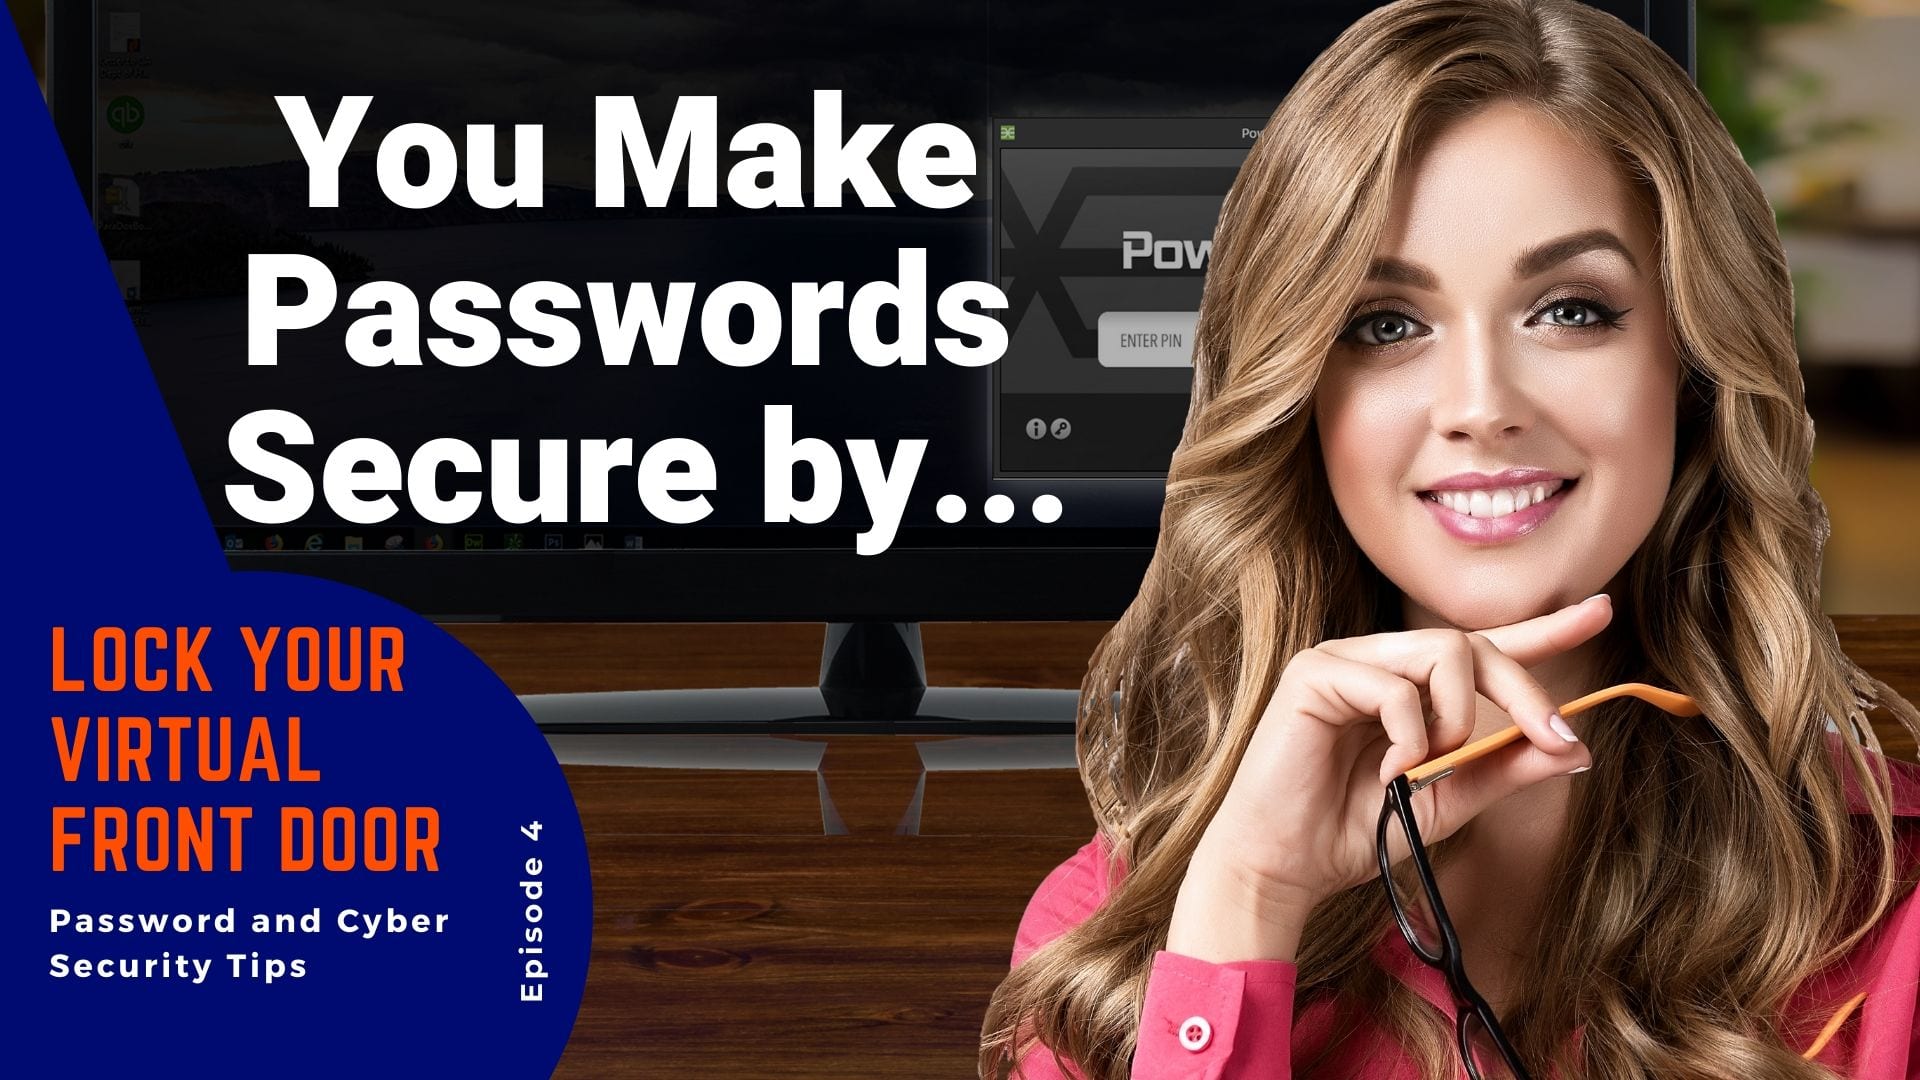 The fourth video of the cybersecurity tips series "Lock Your Virtual Front Door." The image shows a young woman with a friendly smile, right hand under her chin while holding a pair of eye glasses